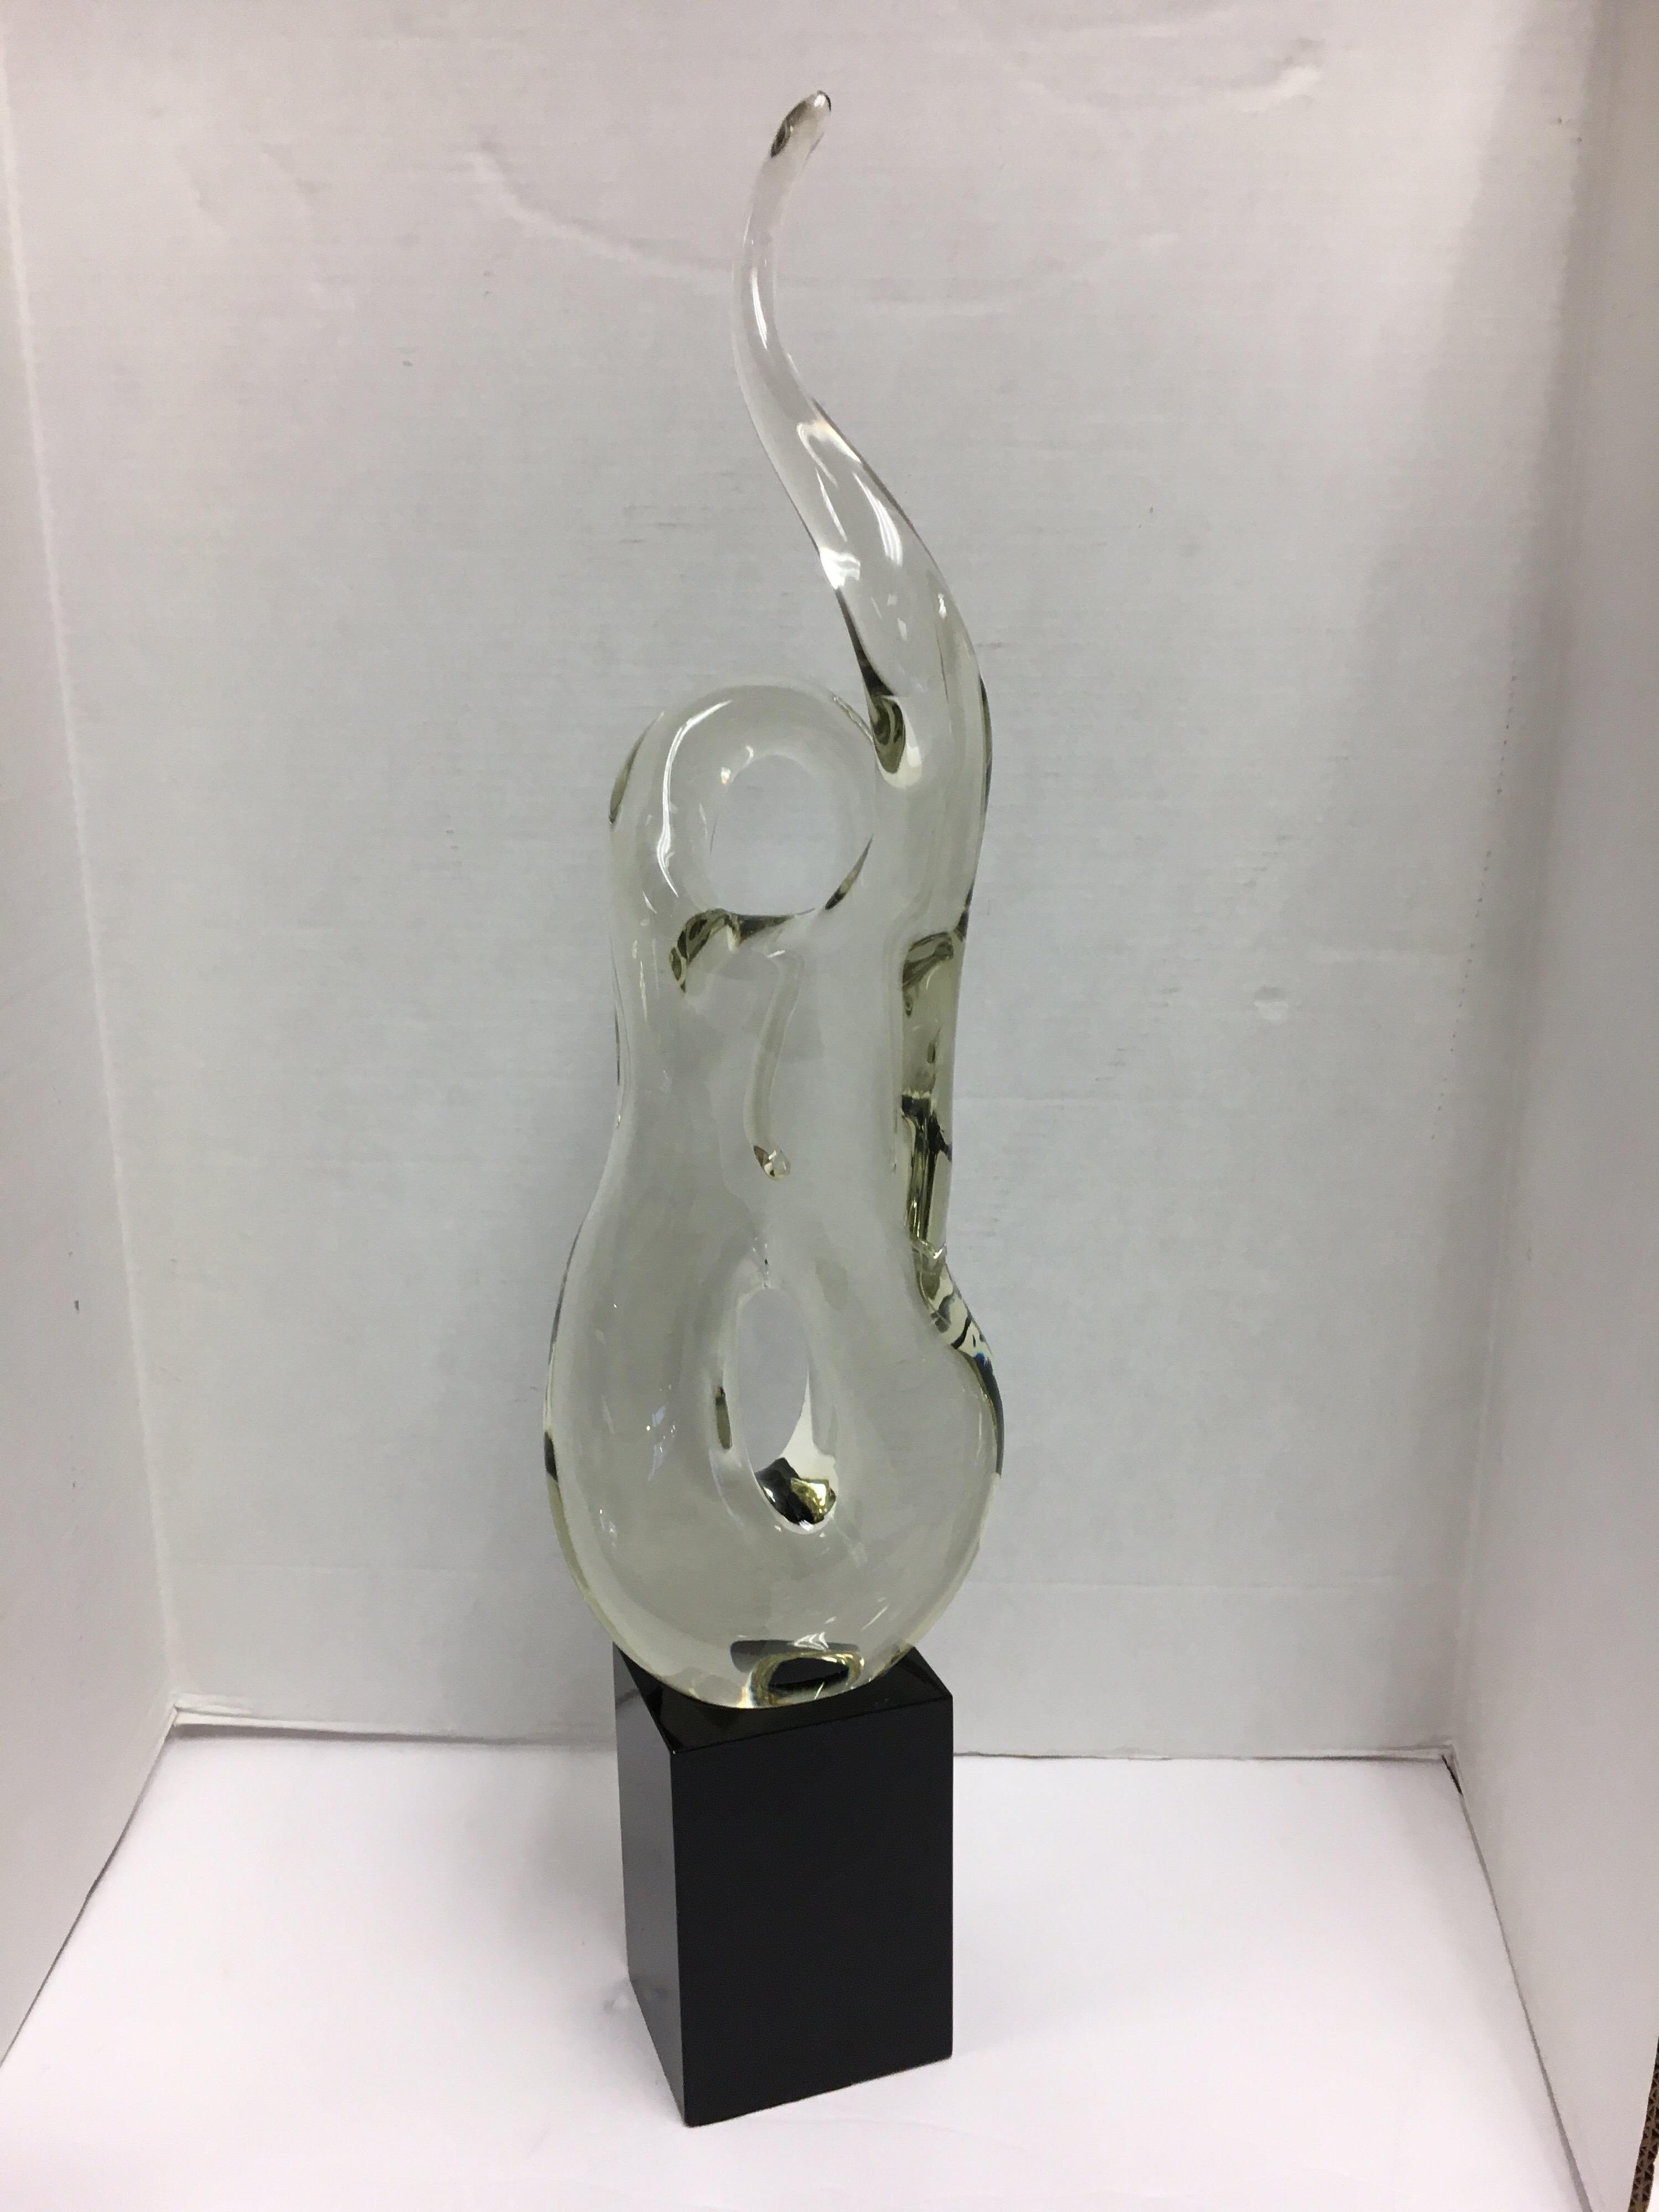 Sitting on a black resin base, this large twisted Murano glass sculpture is a sight to behold. The condition of the sculpture is perfect and it reflects light beautifully. The scale is perfect, not too big, but not too small. Signatures are hard to